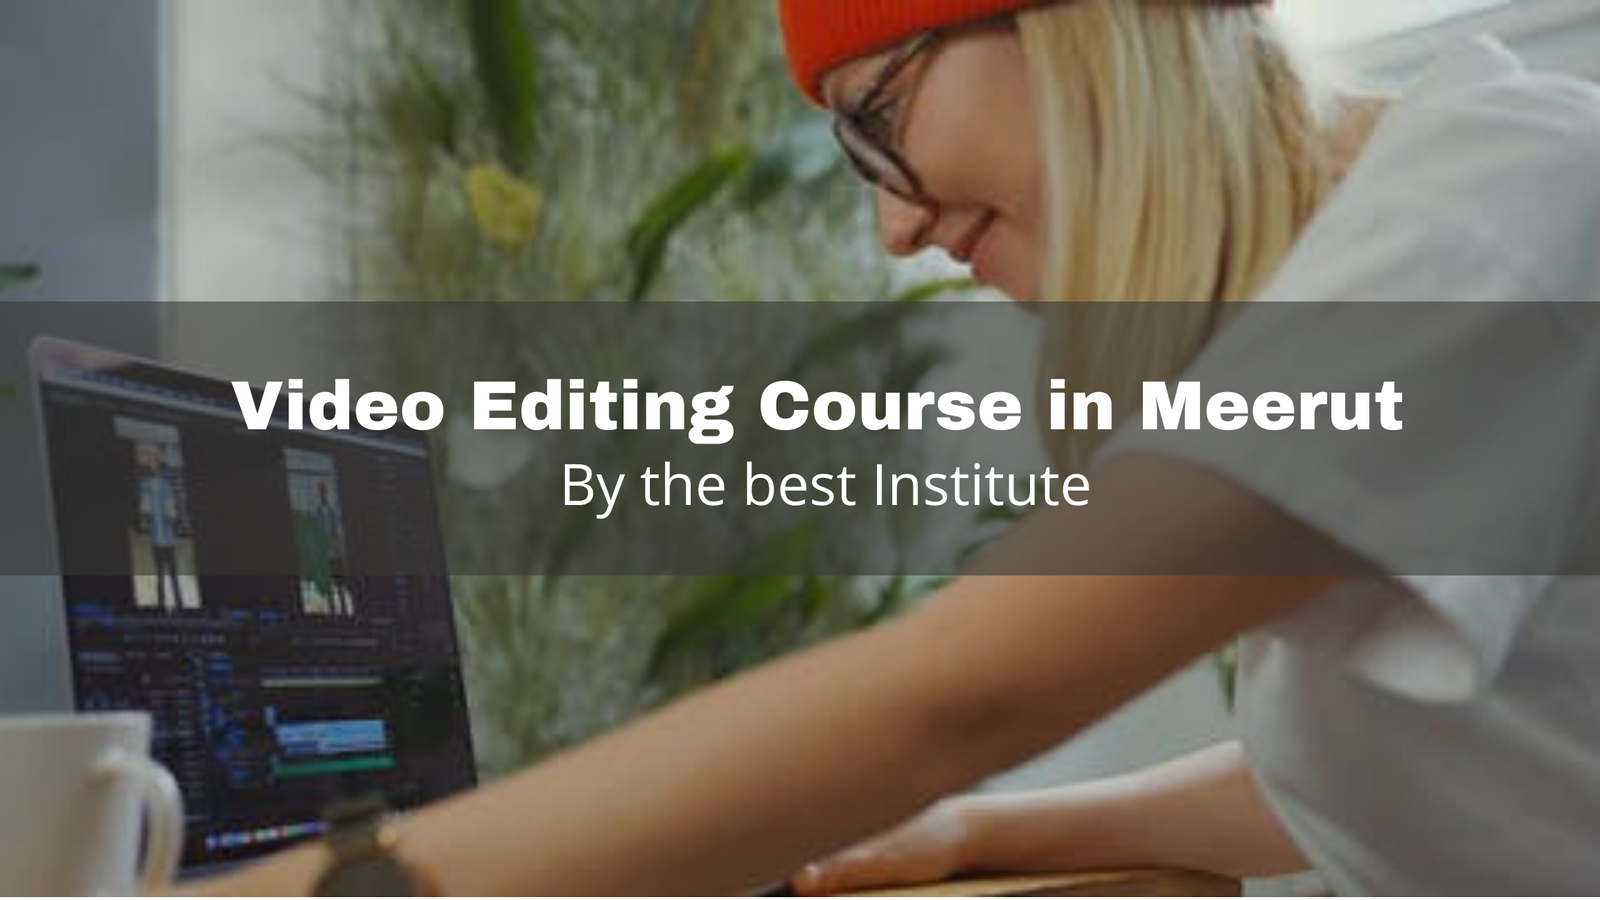 Video Editing Course in Meerut